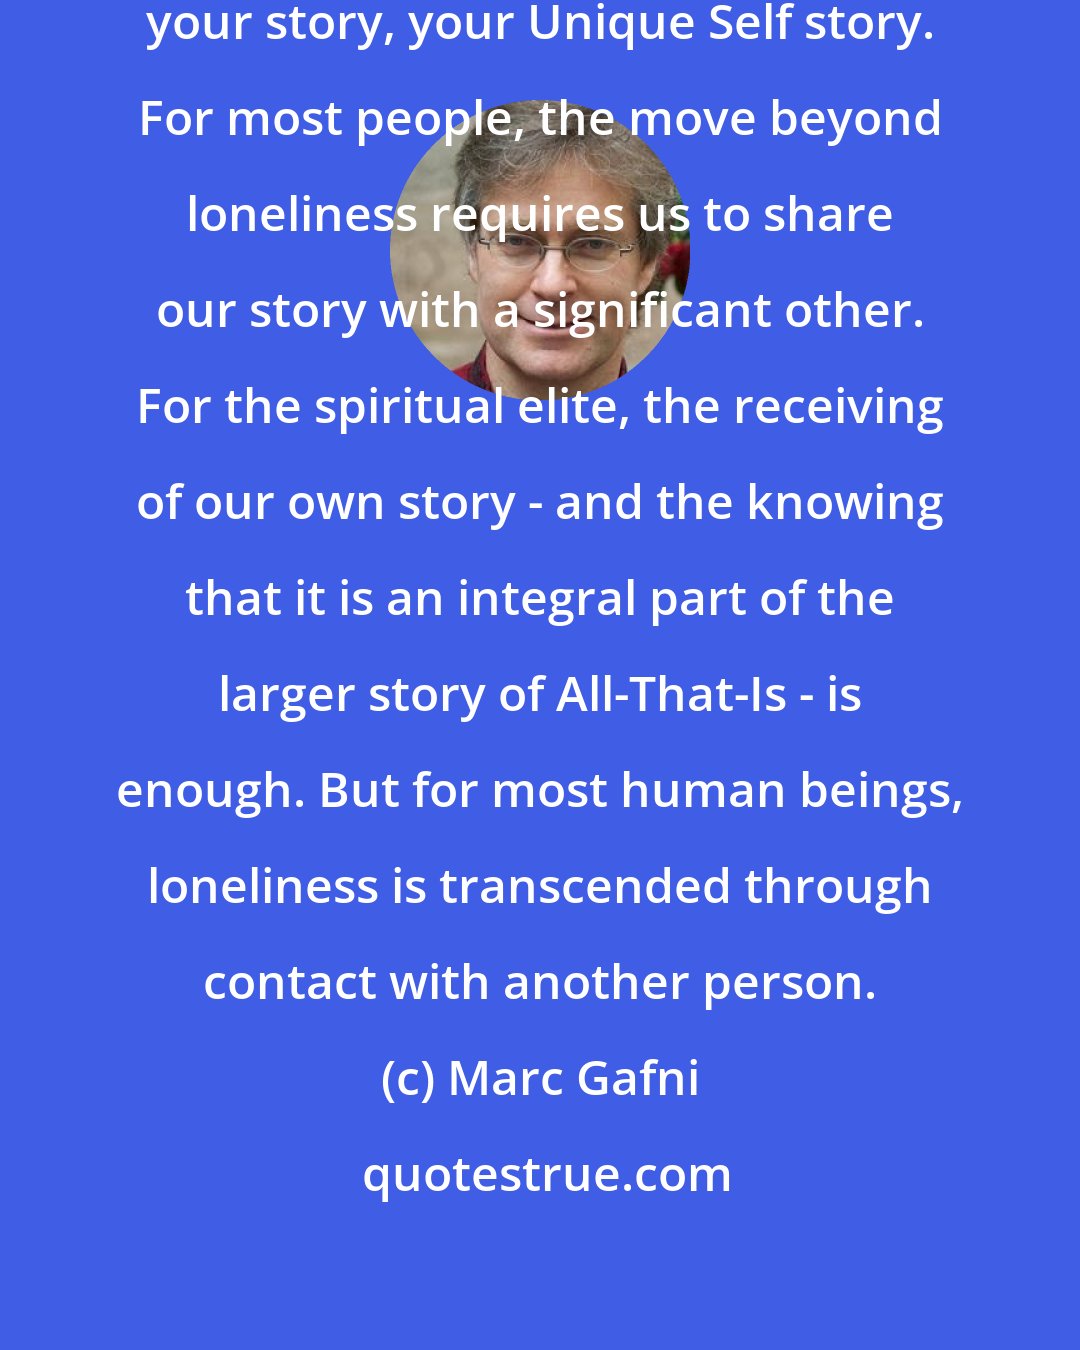 Marc Gafni: Loneliness is the inability to share your story, your Unique Self story. For most people, the move beyond loneliness requires us to share our story with a significant other. For the spiritual elite, the receiving of our own story - and the knowing that it is an integral part of the larger story of All-That-Is - is enough. But for most human beings, loneliness is transcended through contact with another person.